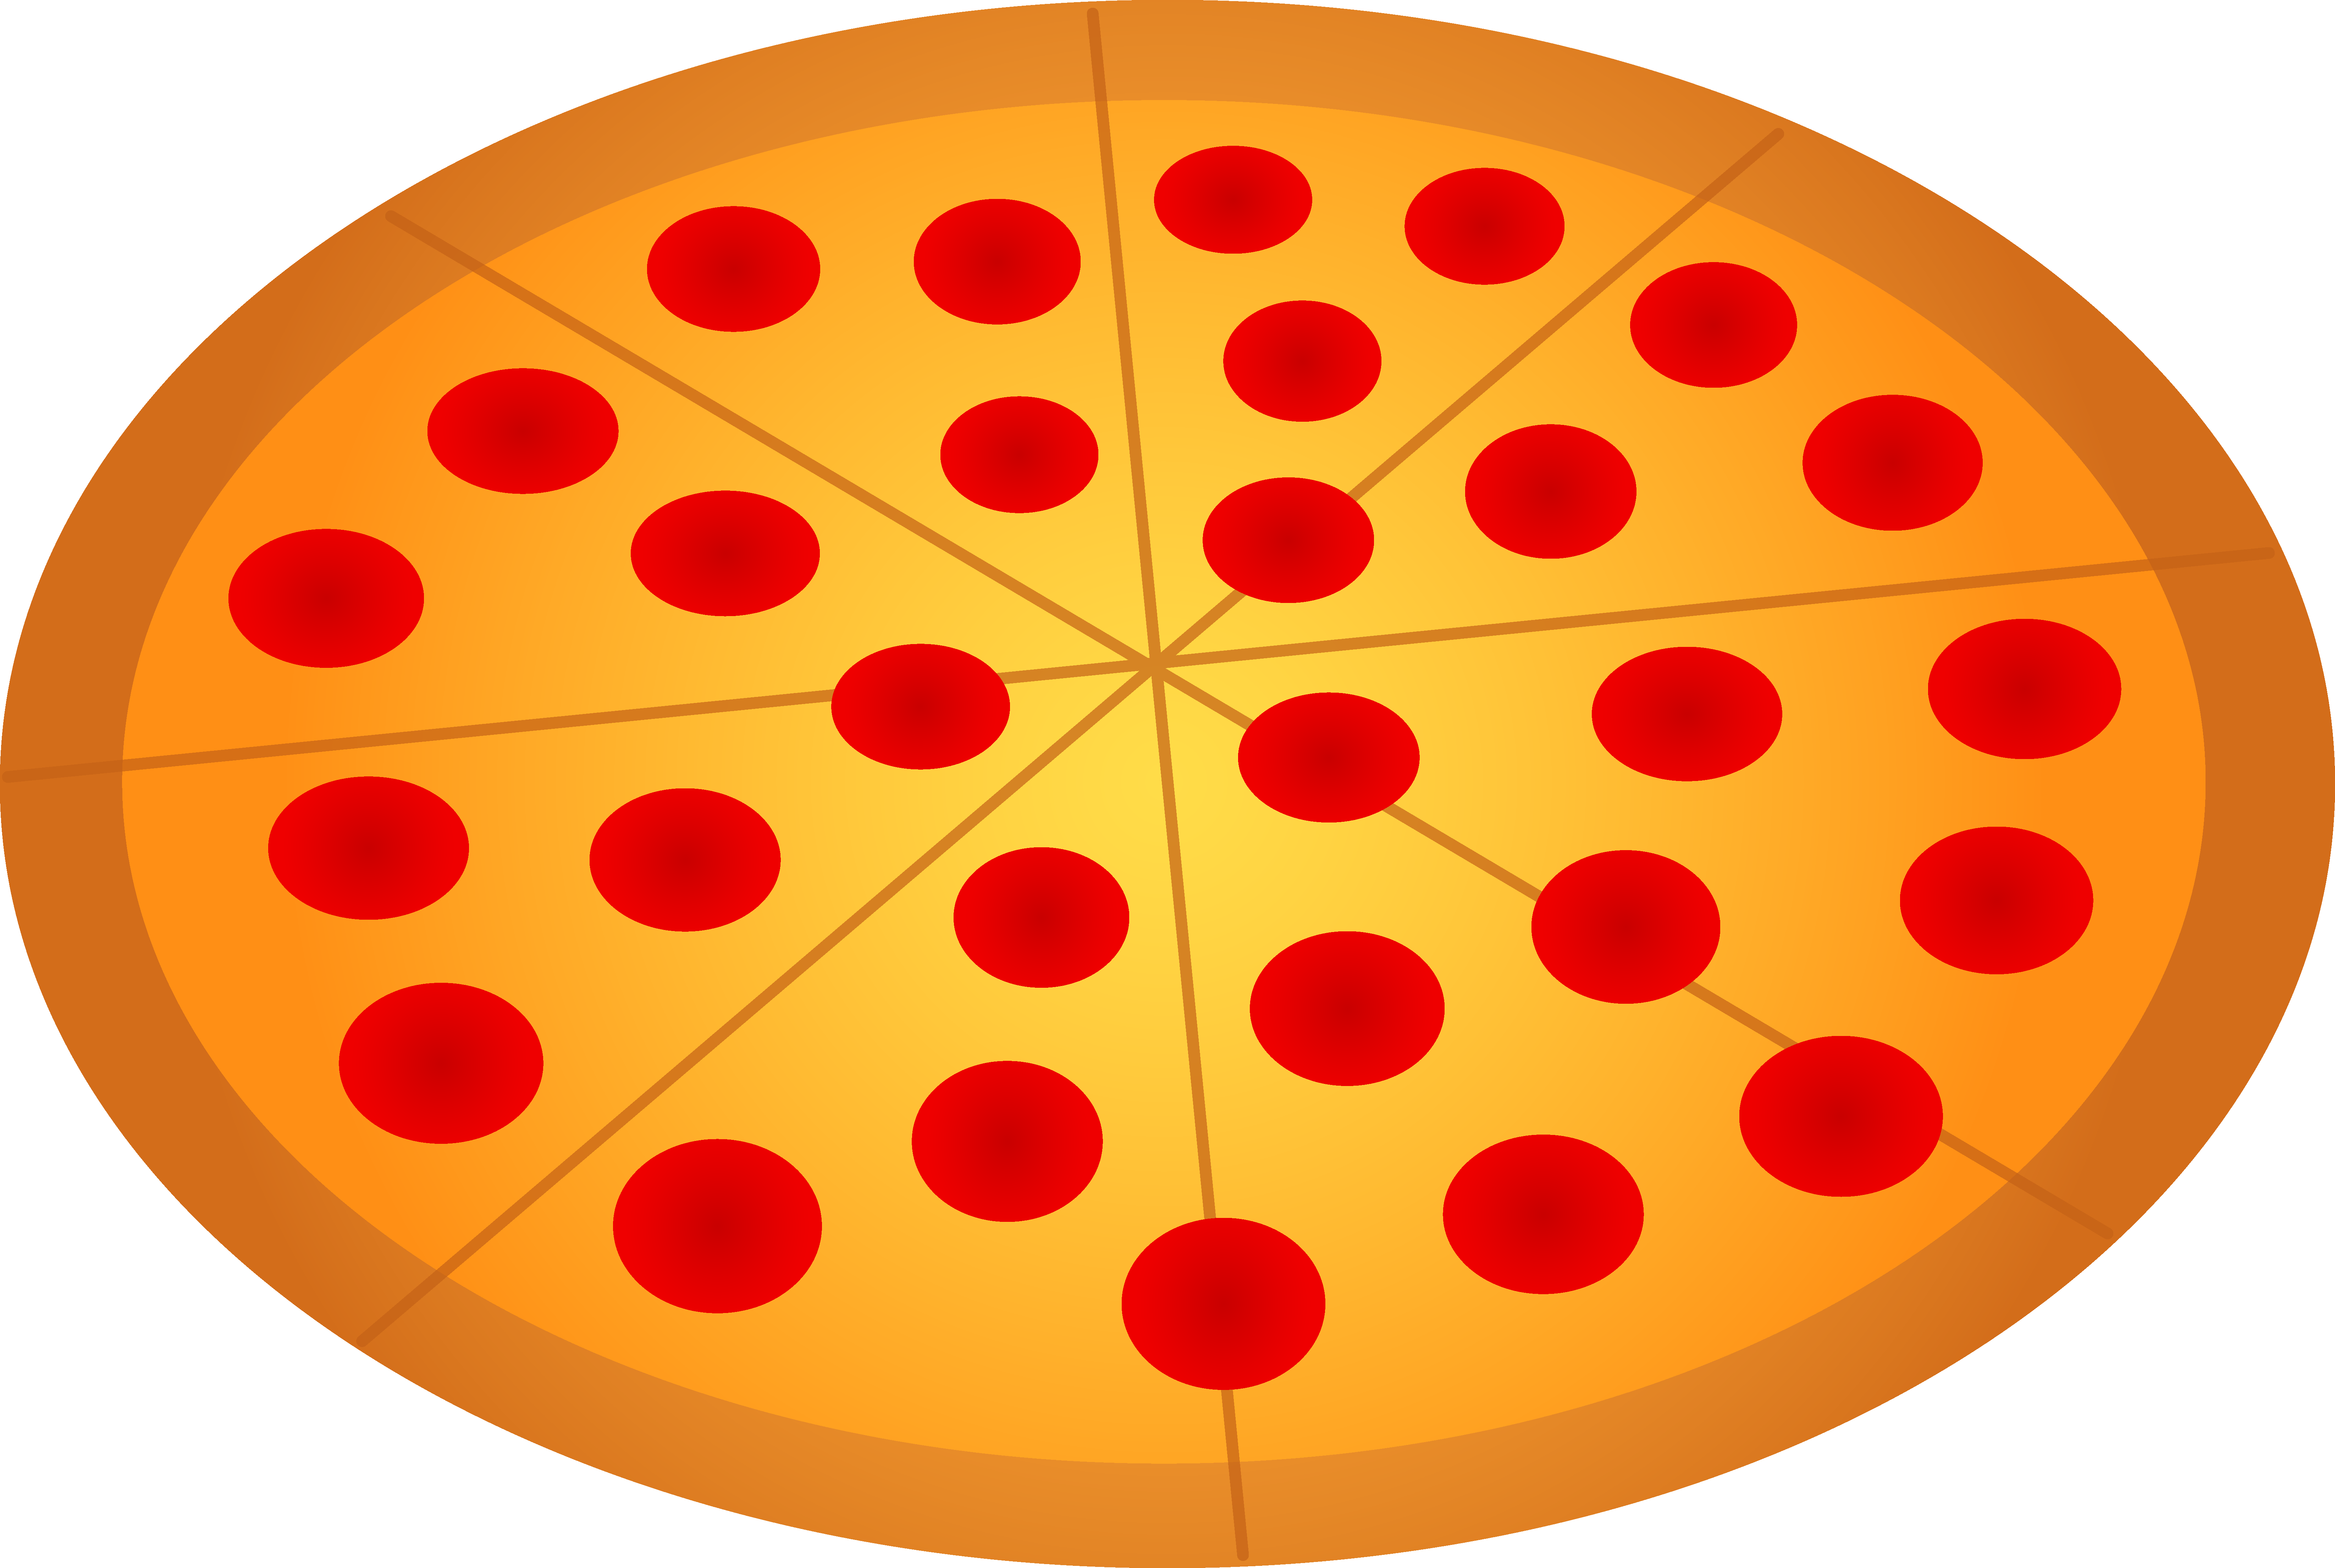 Slice cheese pizza clipart the cliparts